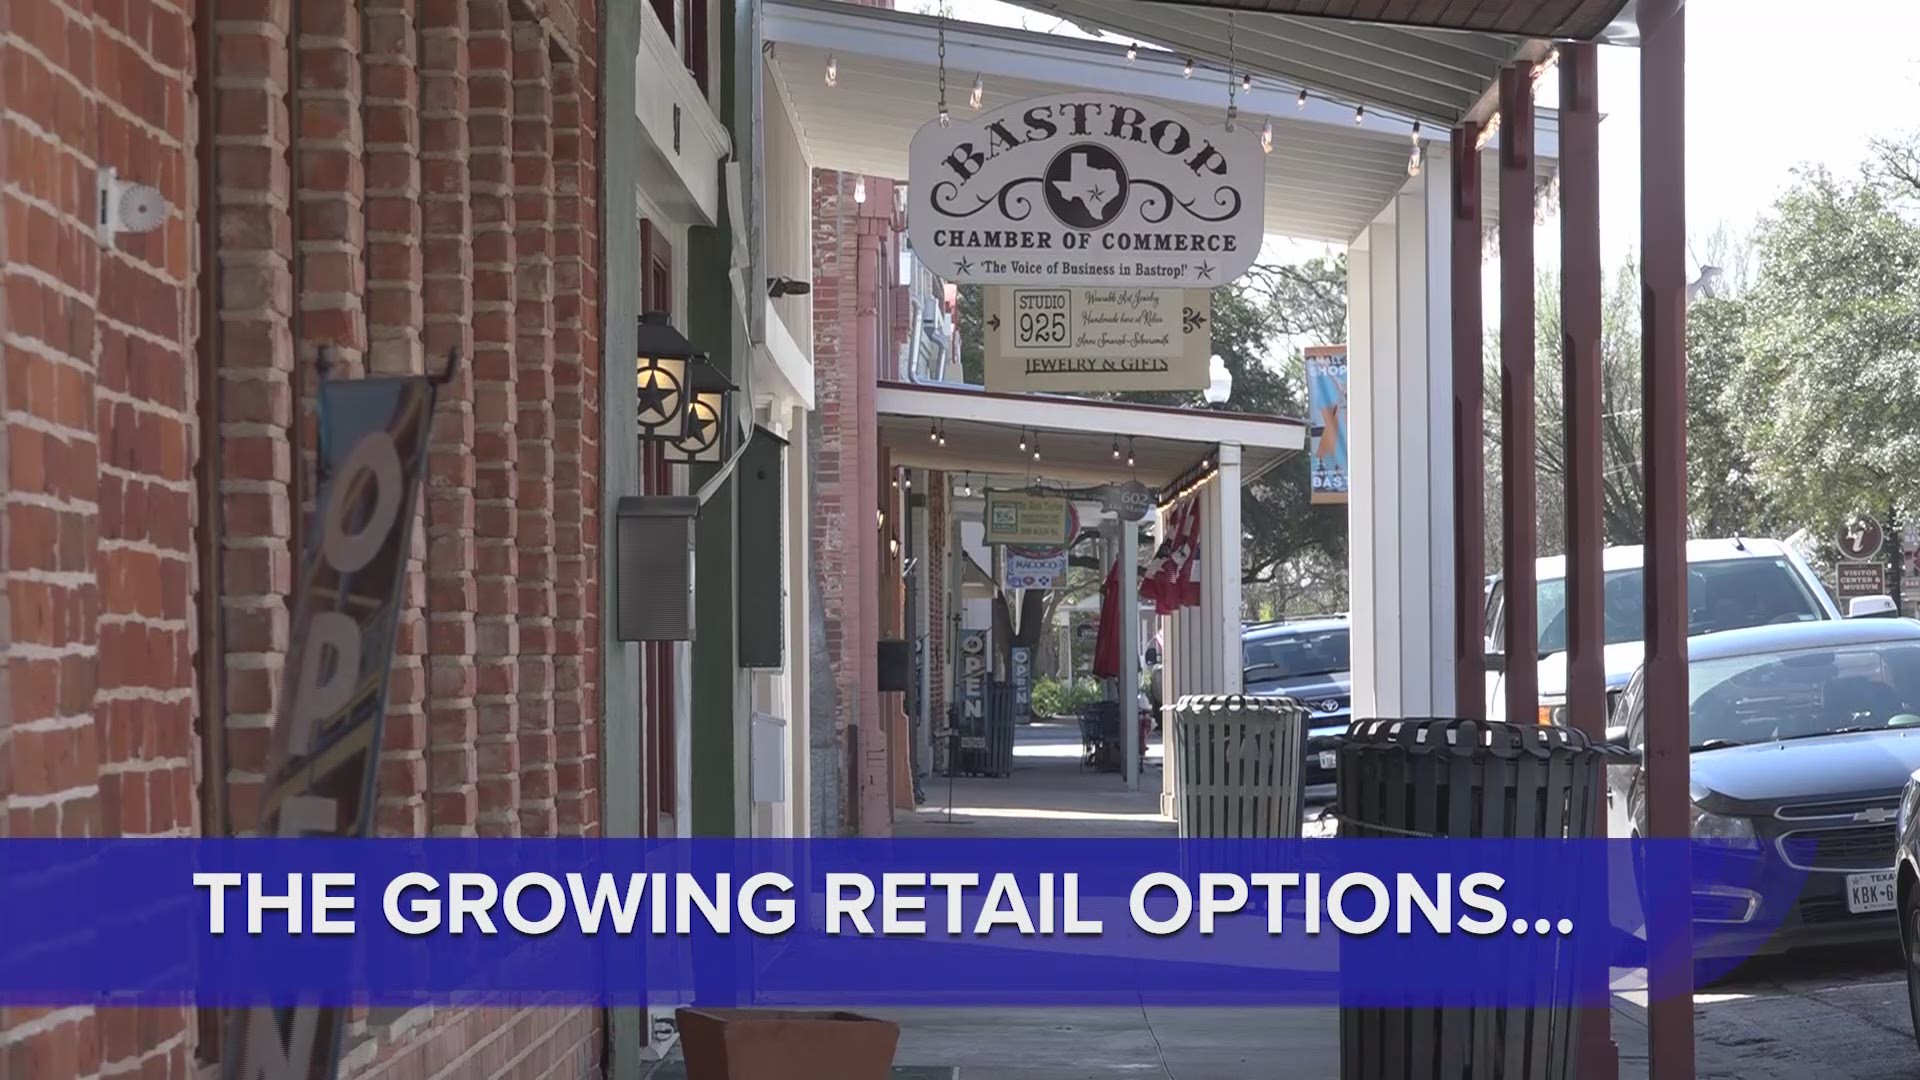 Bastrop has seen growth in business and population, now the city and county are both preparing for more growth.